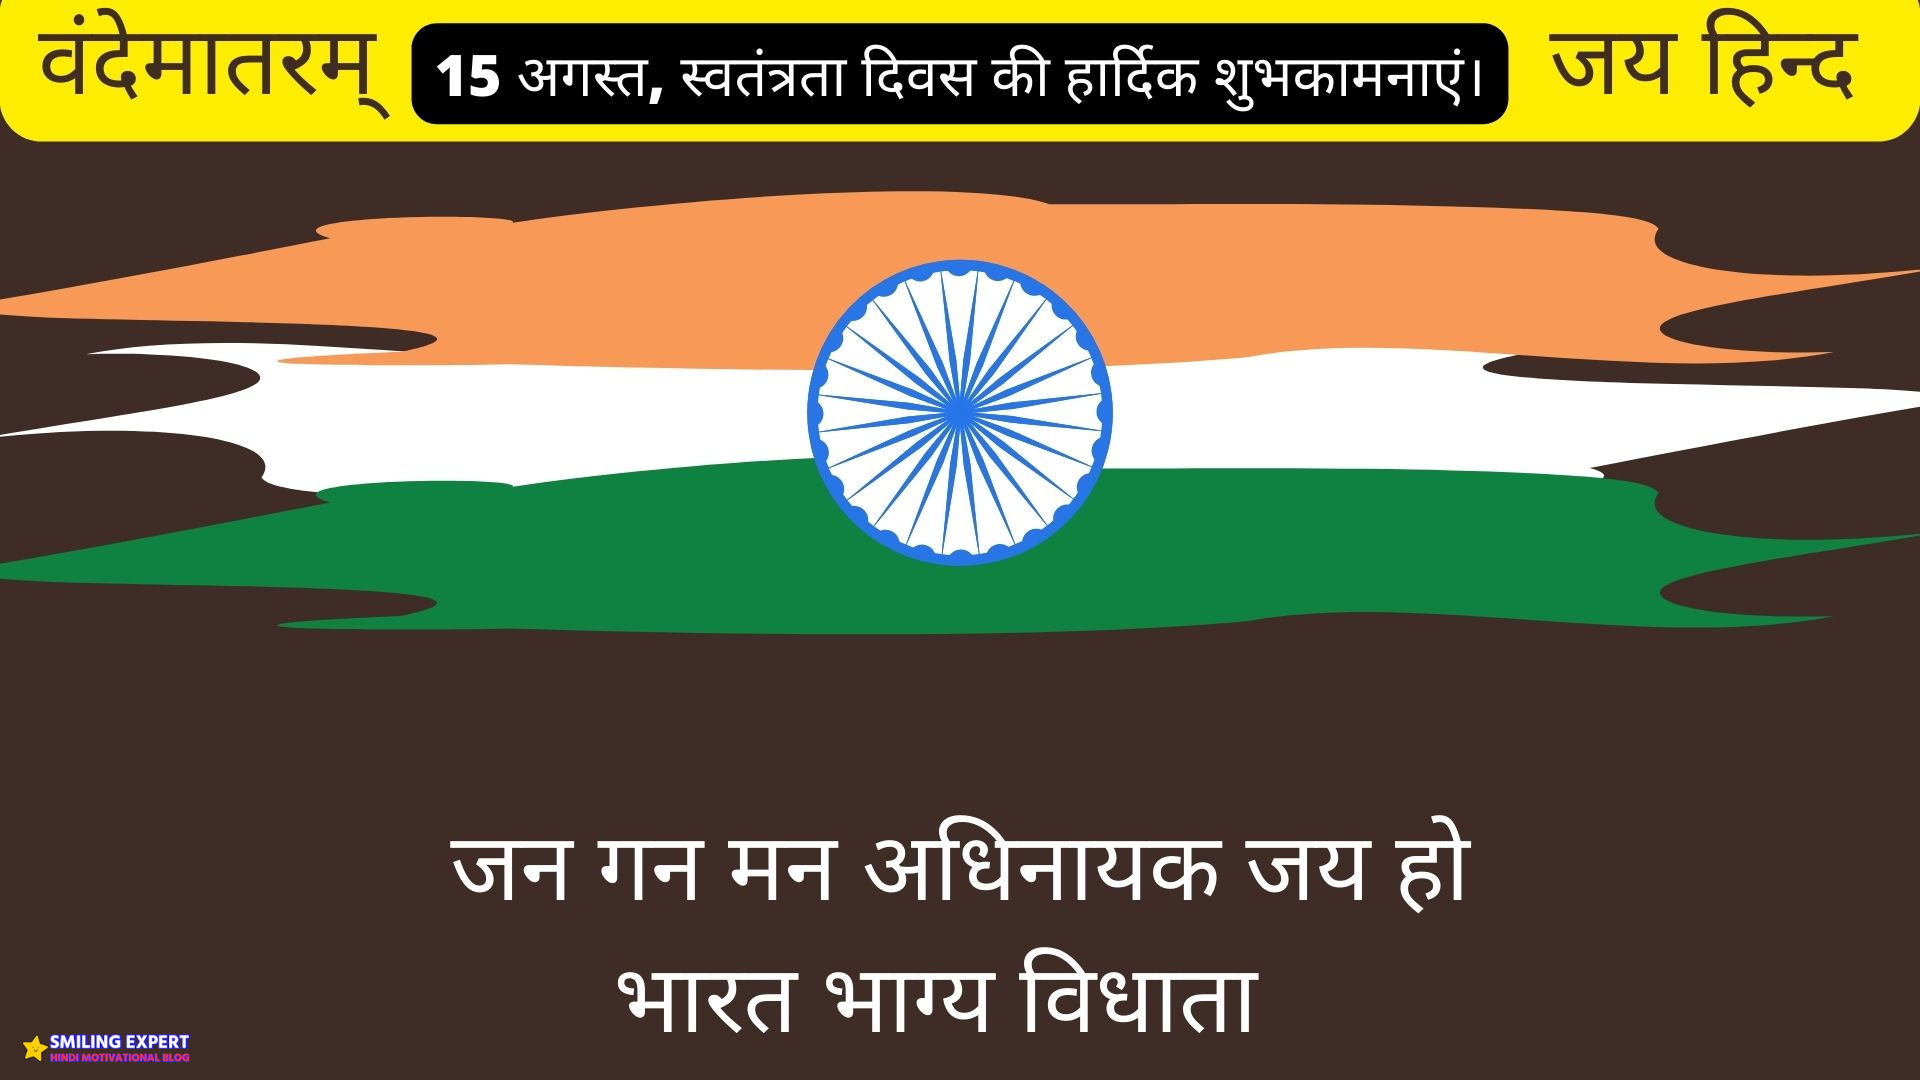 quotes for independence day in hindi